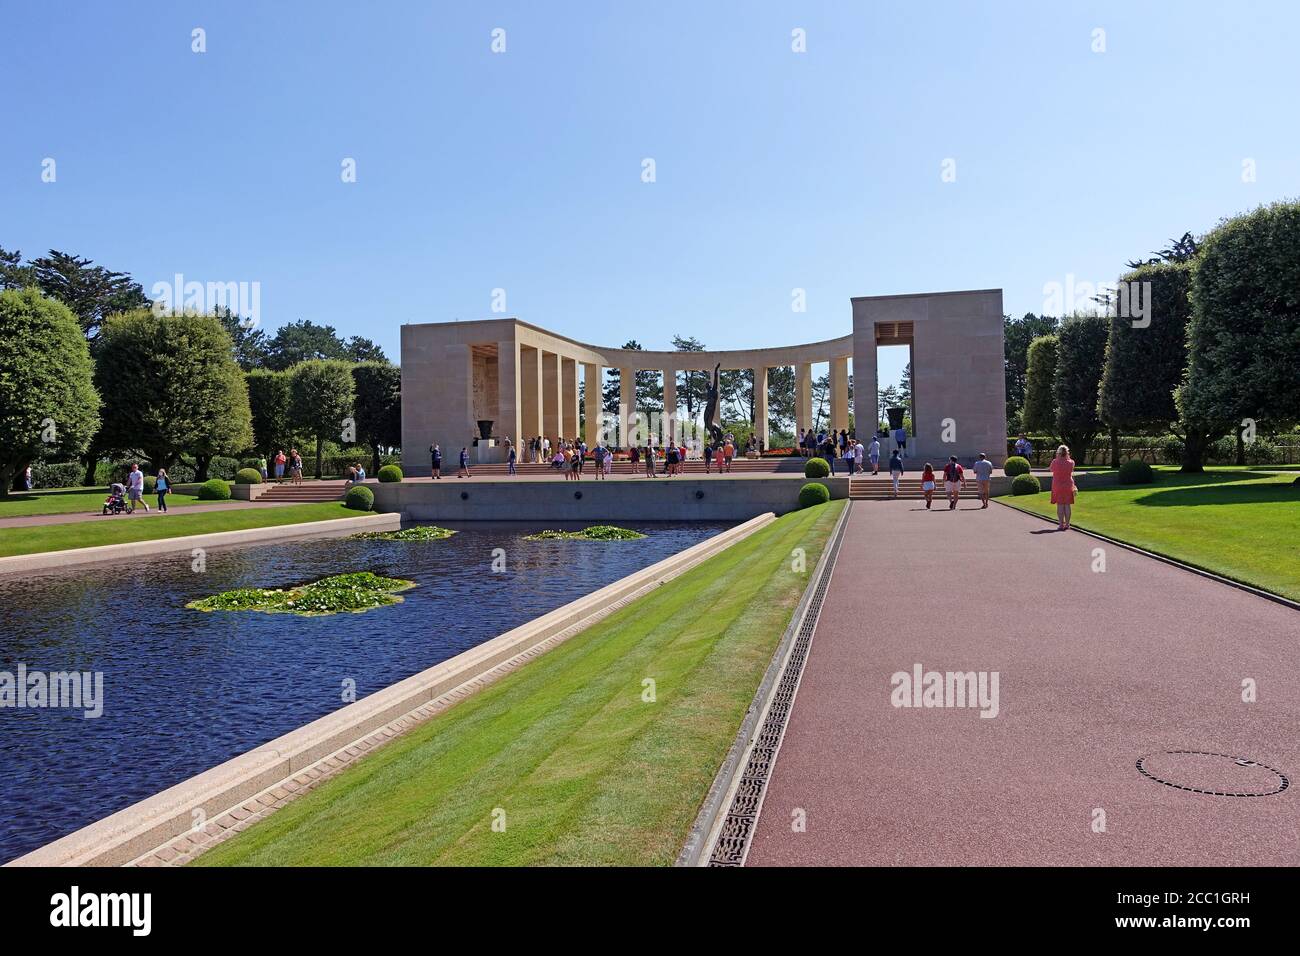 Normandy, France: August 2020: The Normandy American Cemetery and Memorial is a World War II cemetery and memorial in Colleville-sur-Mer, Normandy, Fr Stock Photo